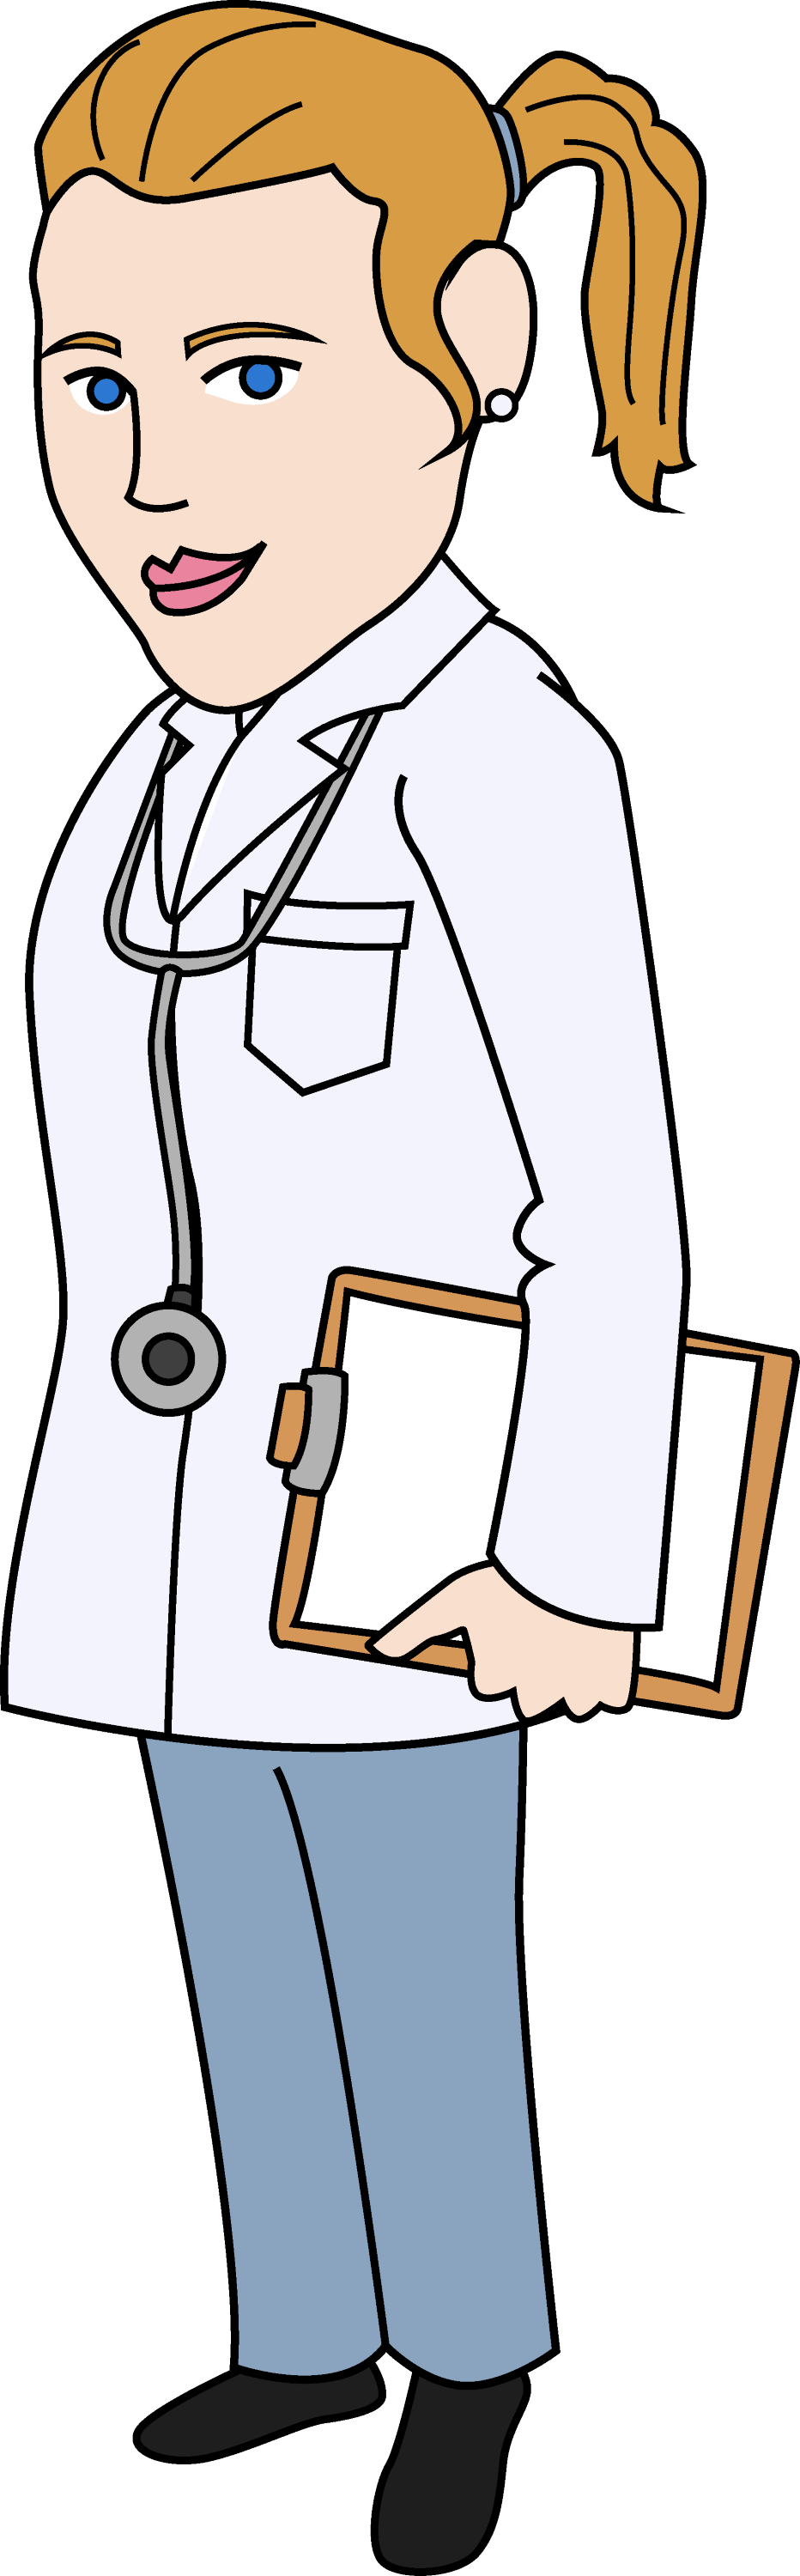 clipart images of a doctor - photo #13